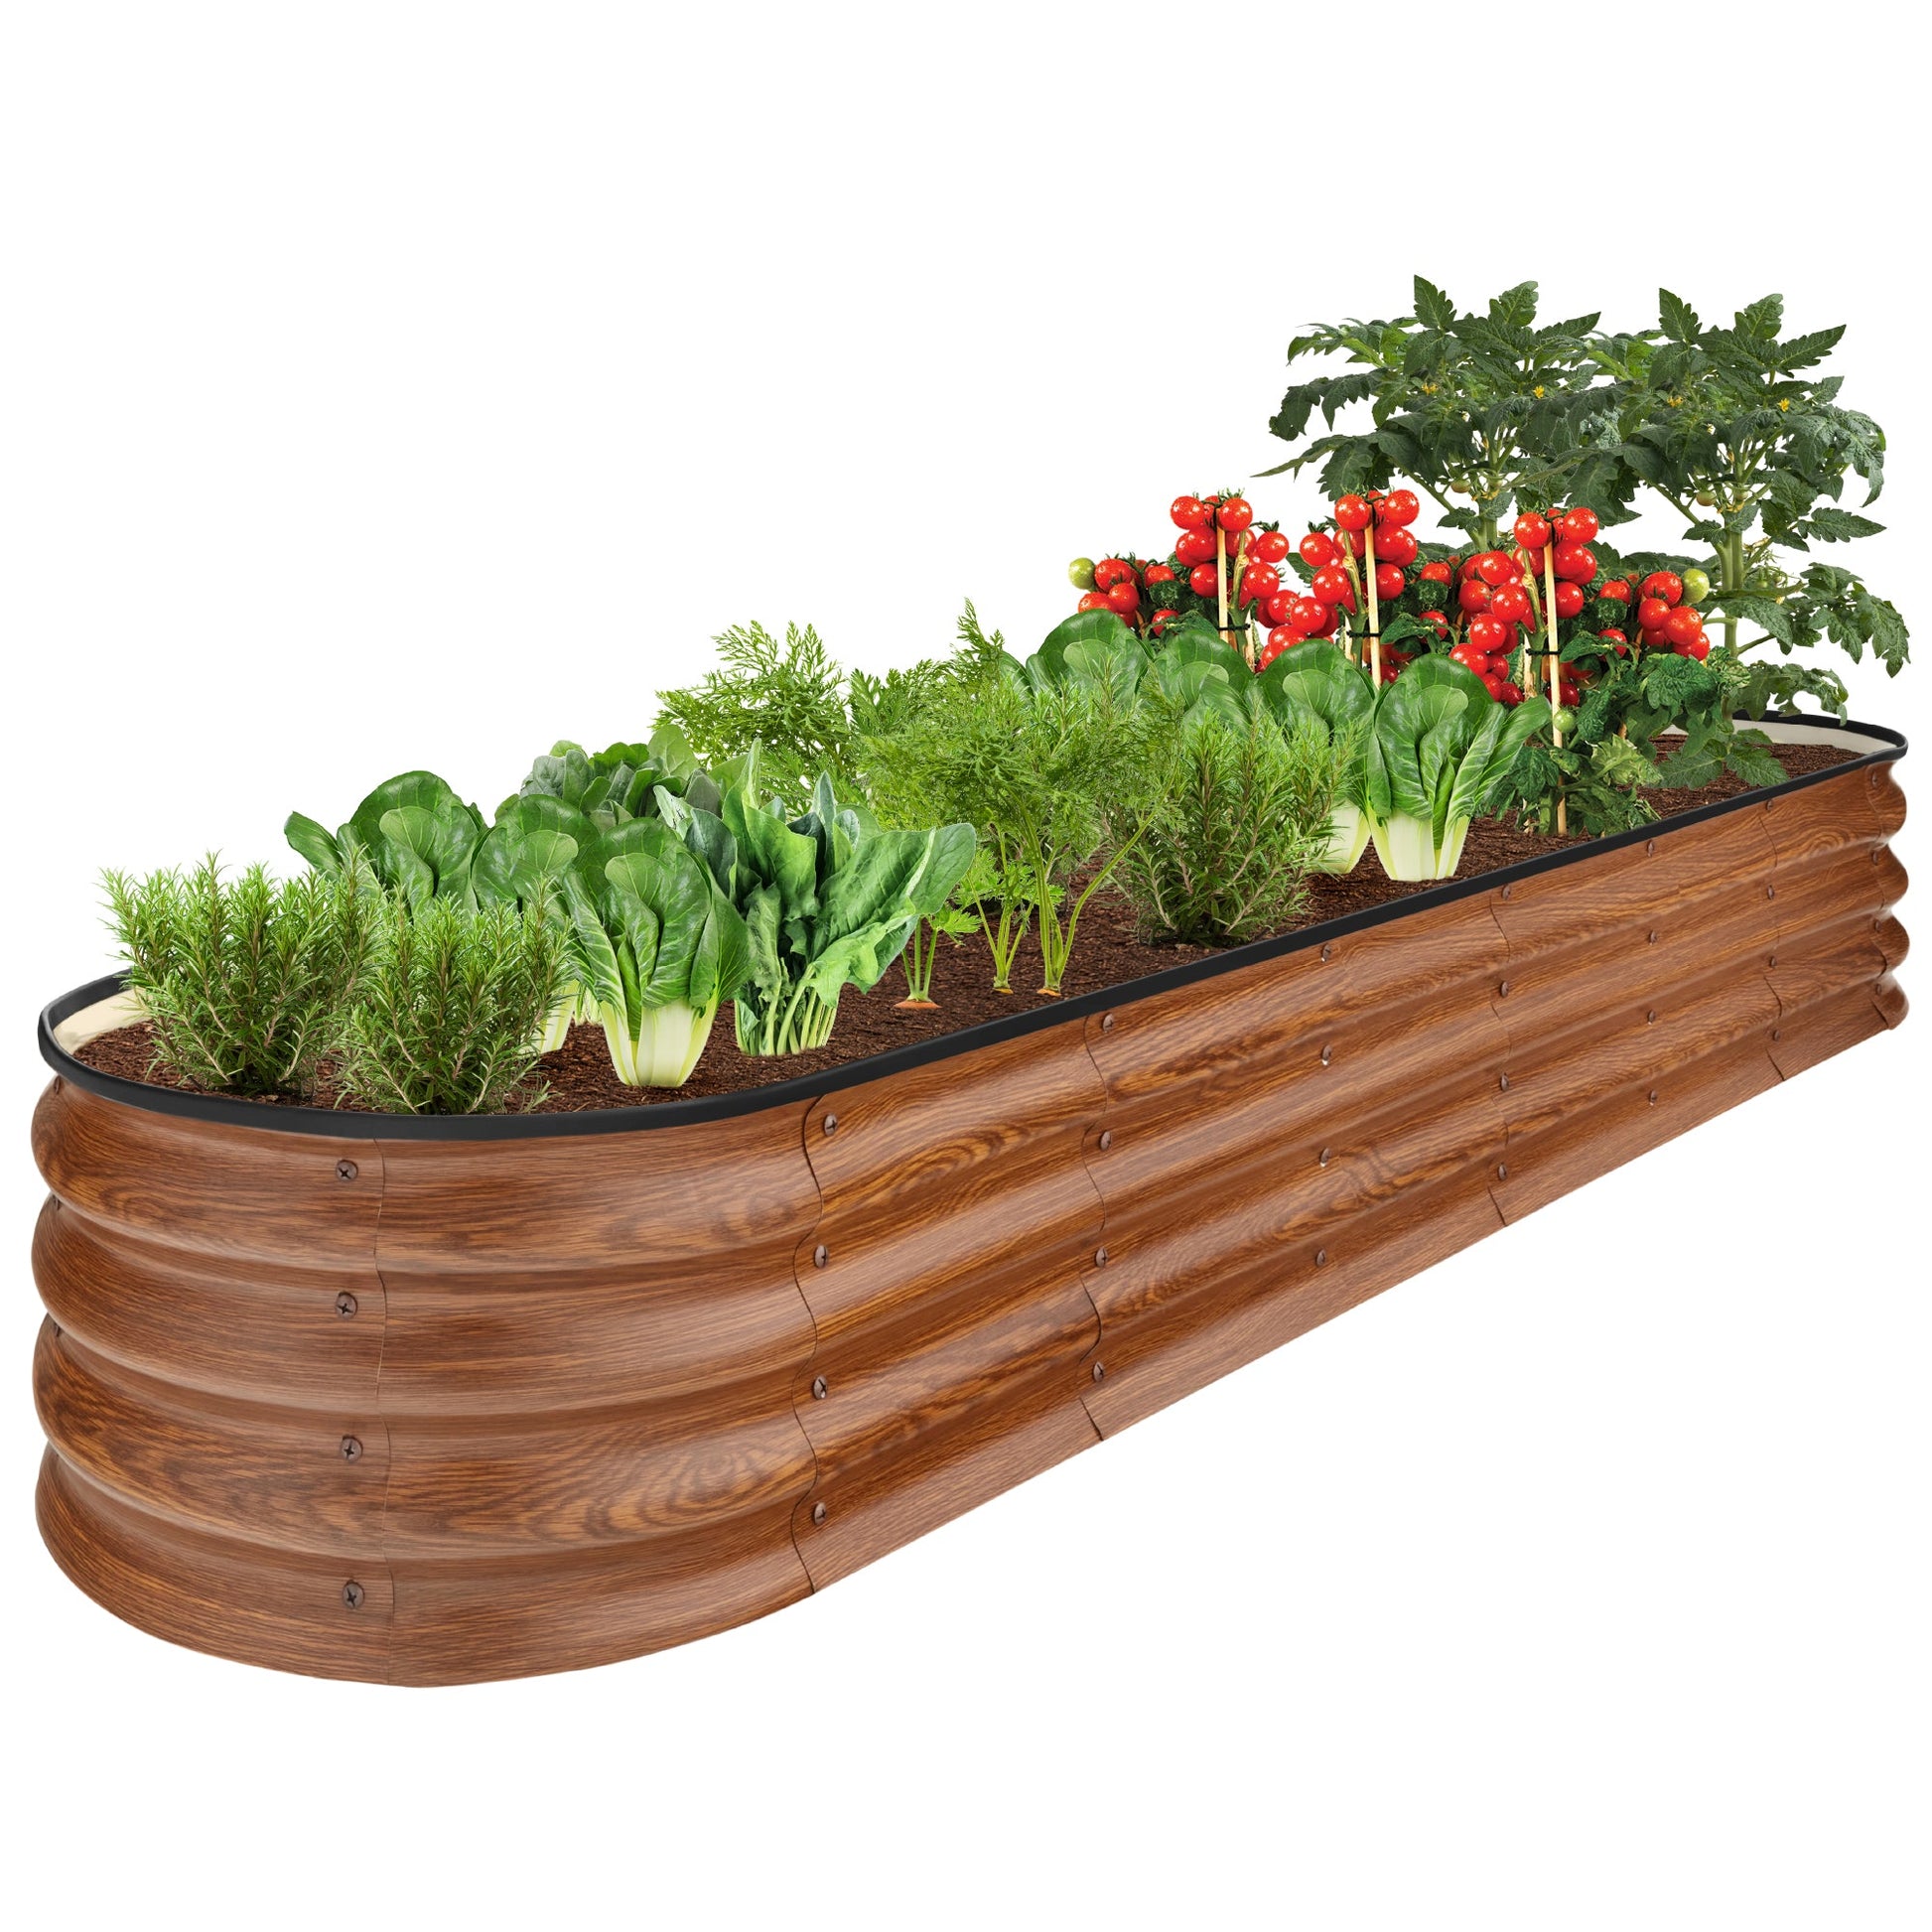 Outdoor Metal Raised Oval Garden Bed for Vegetables, Flowers - 8x2x1ft